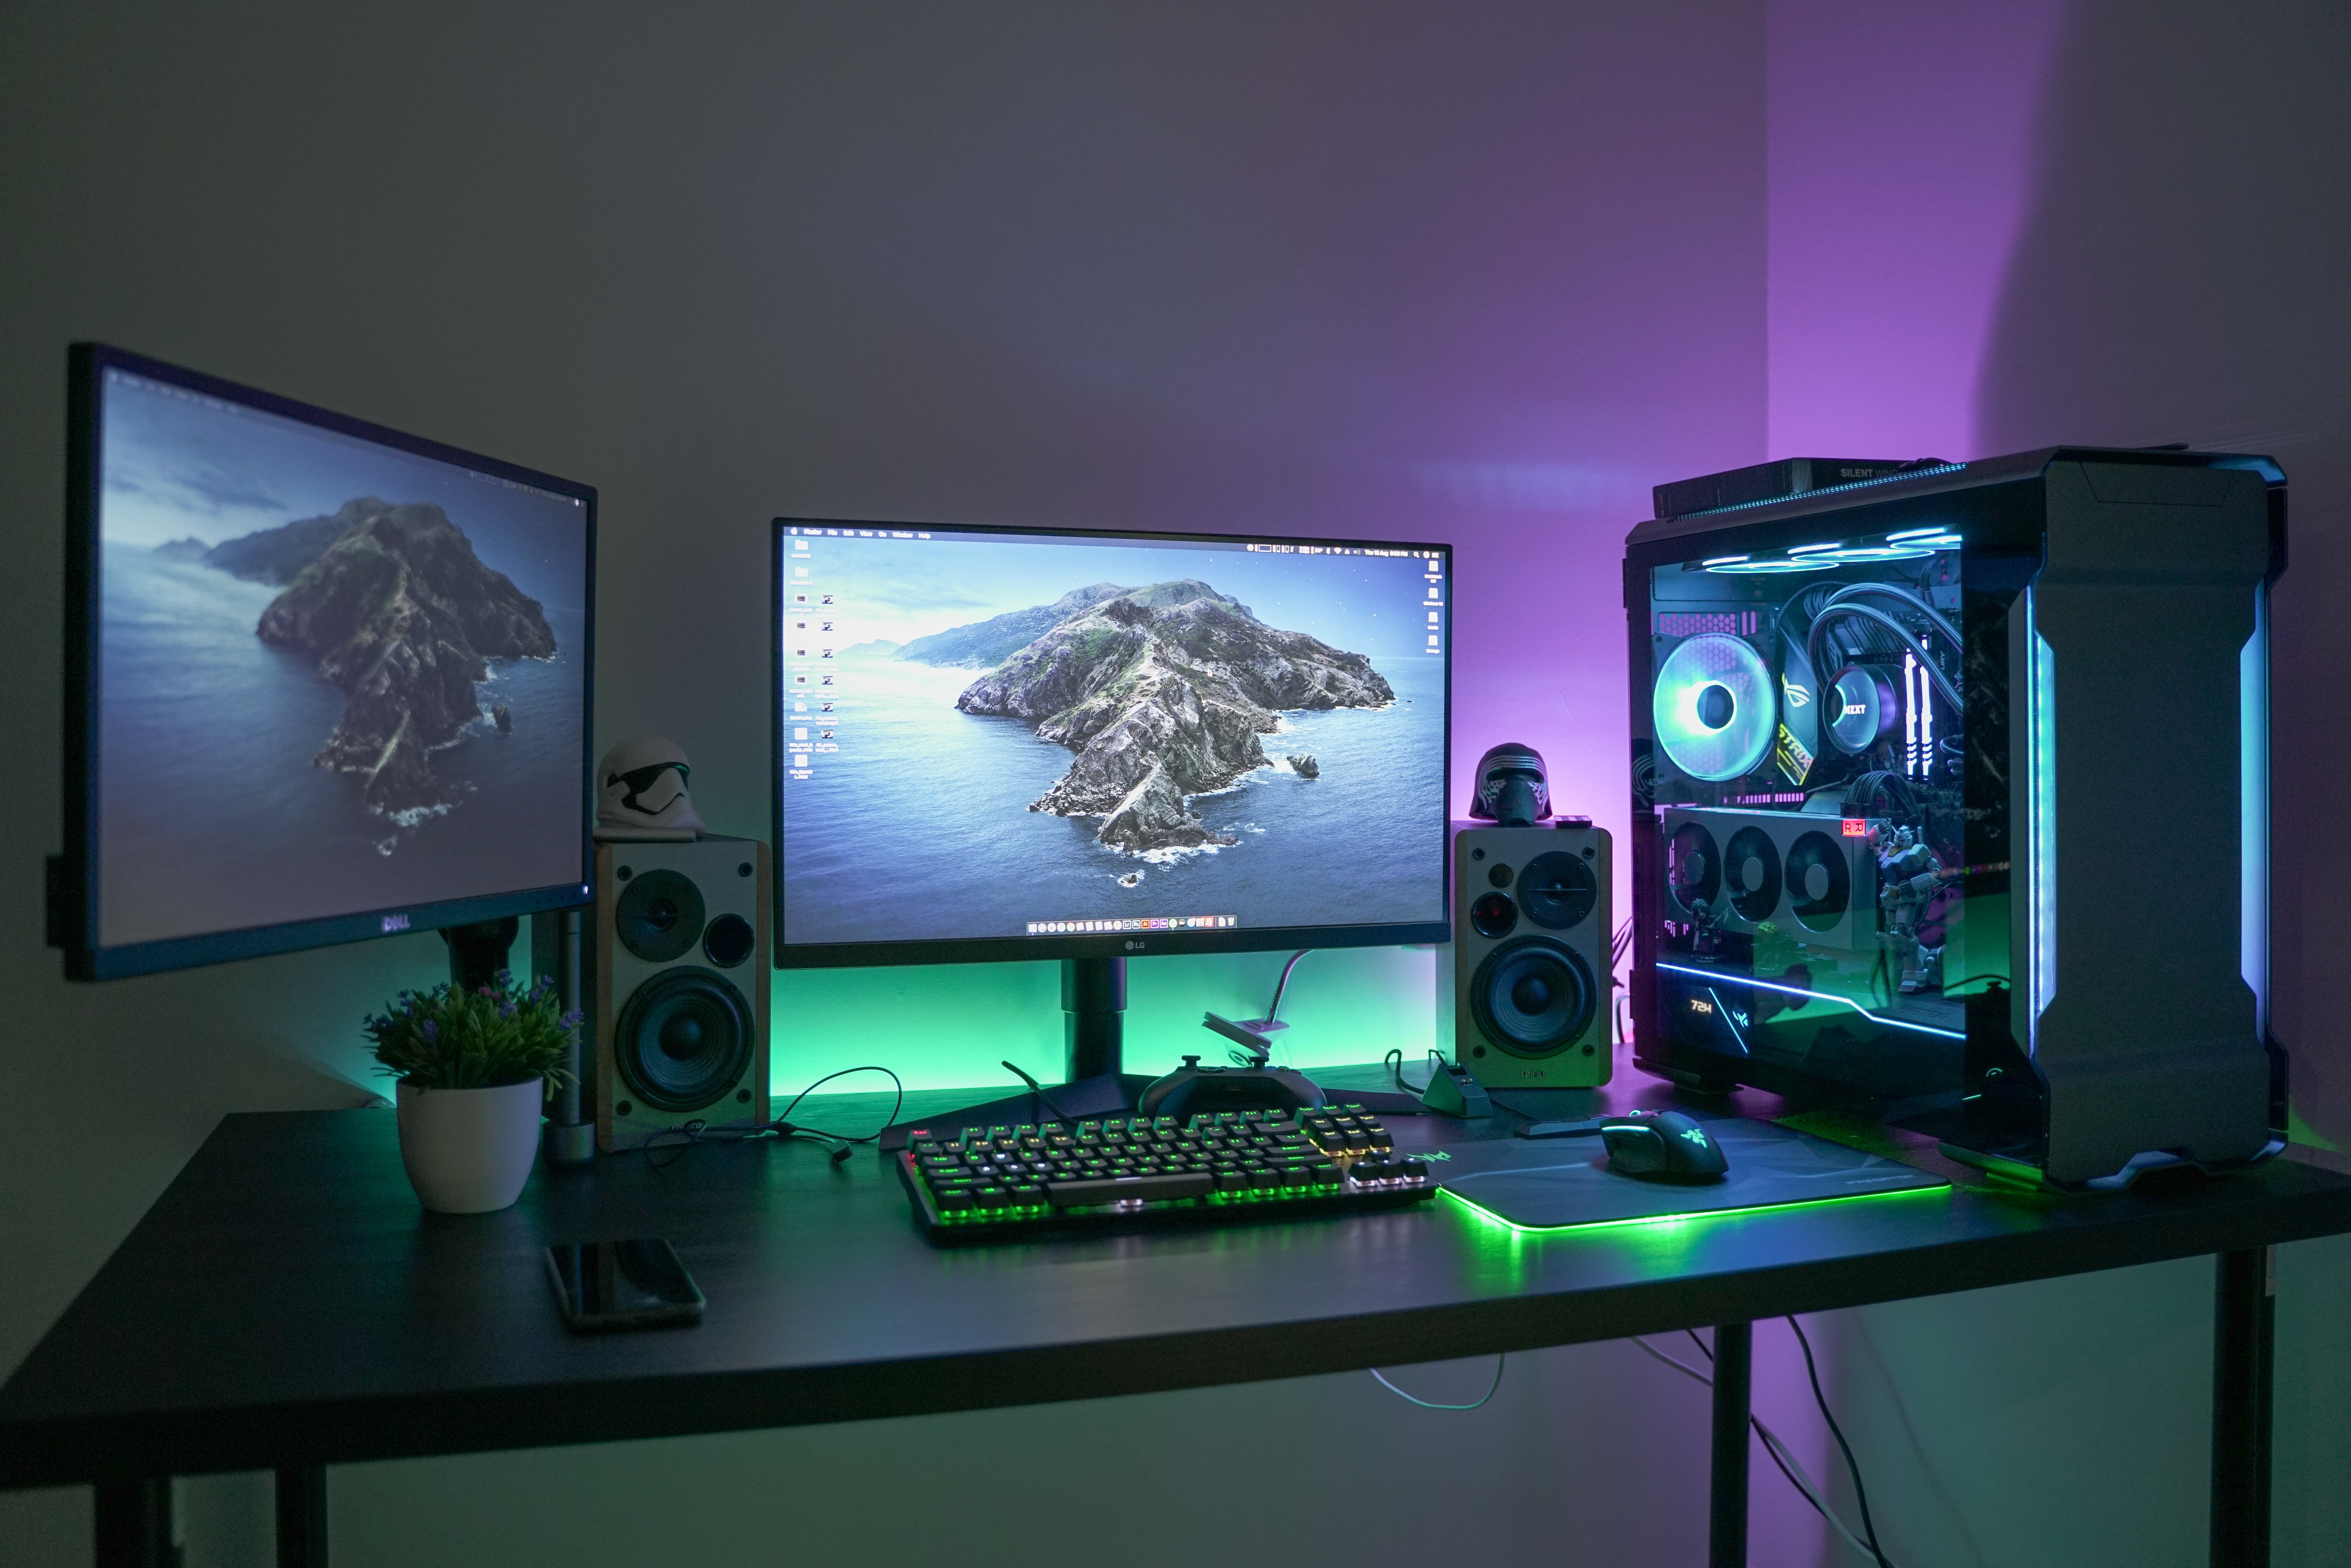 12 things you need for the perfect gaming setup - Reviewed